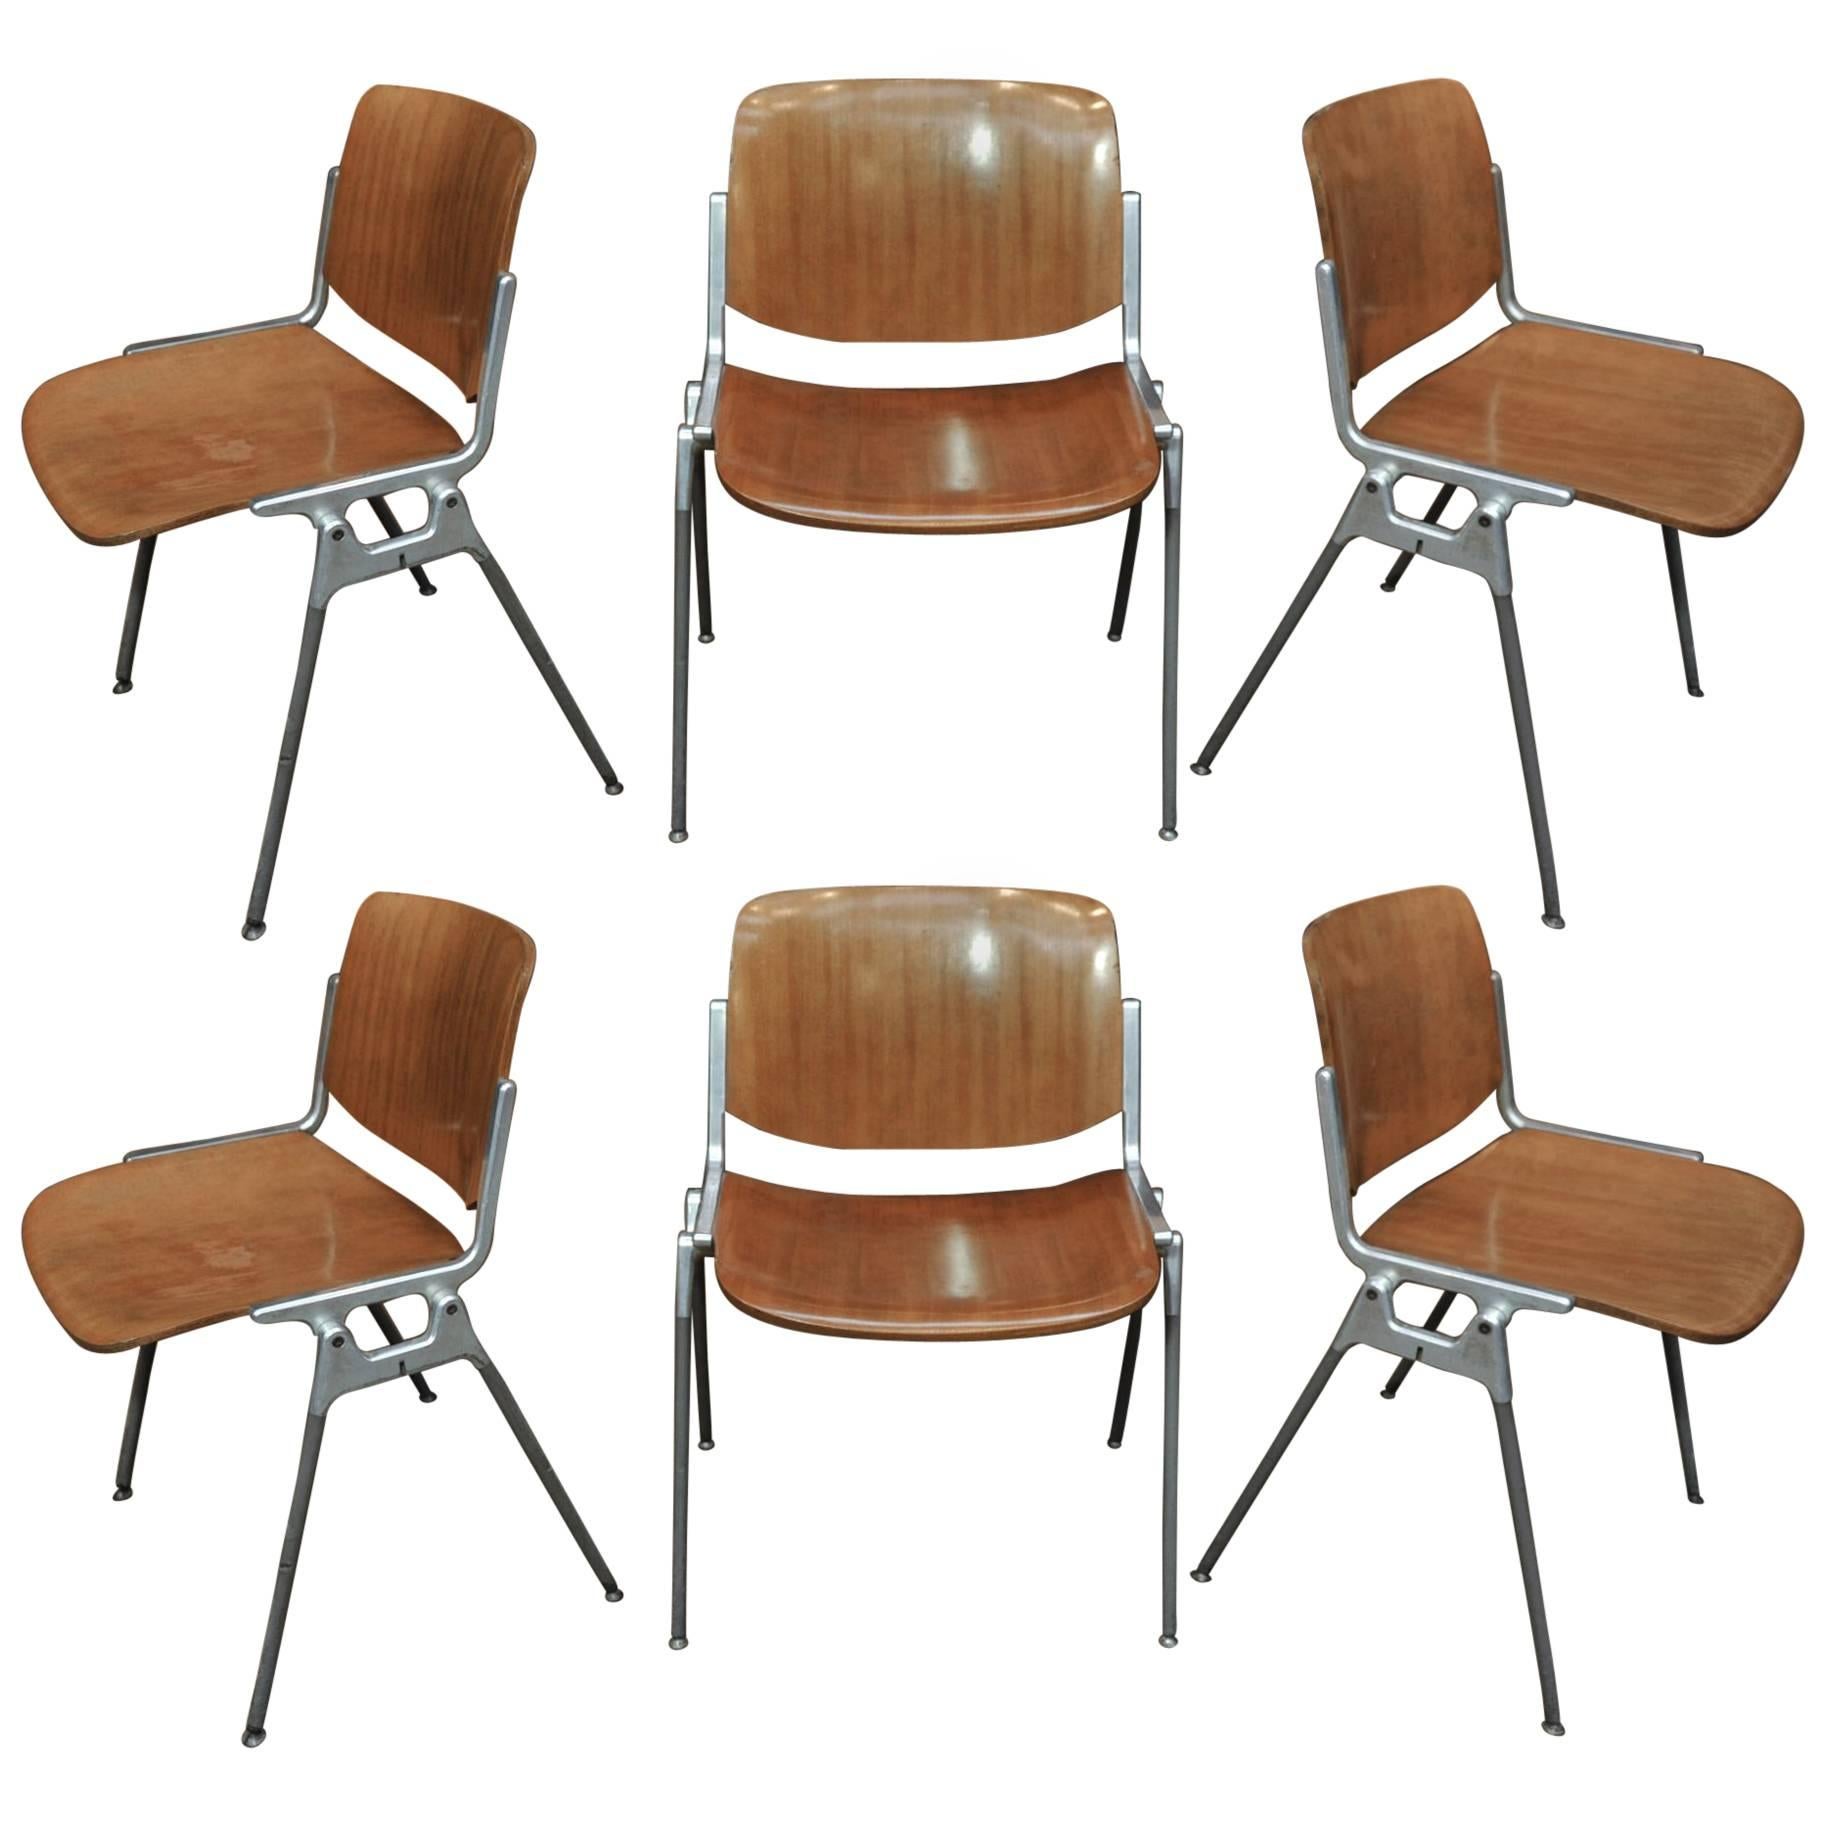 6 Stacking Chairs by Giancarlo Piretti for Castelli 1960s